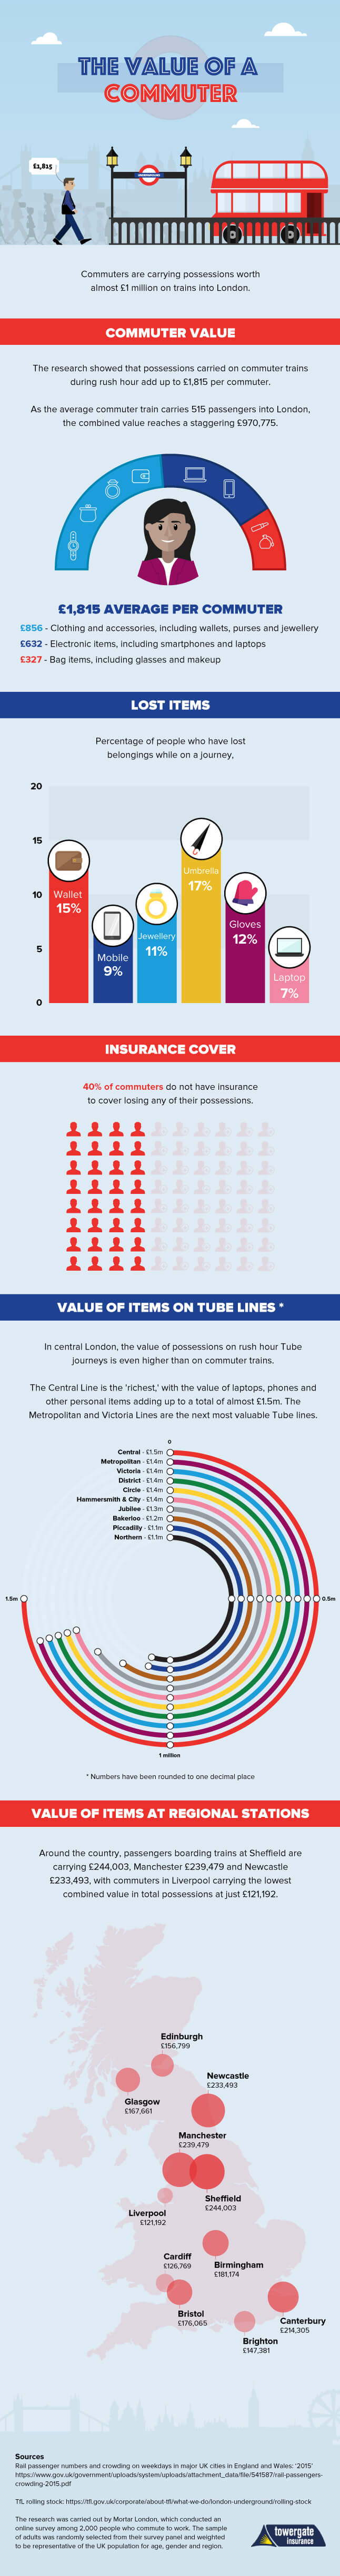 The value of a commuter - infographic